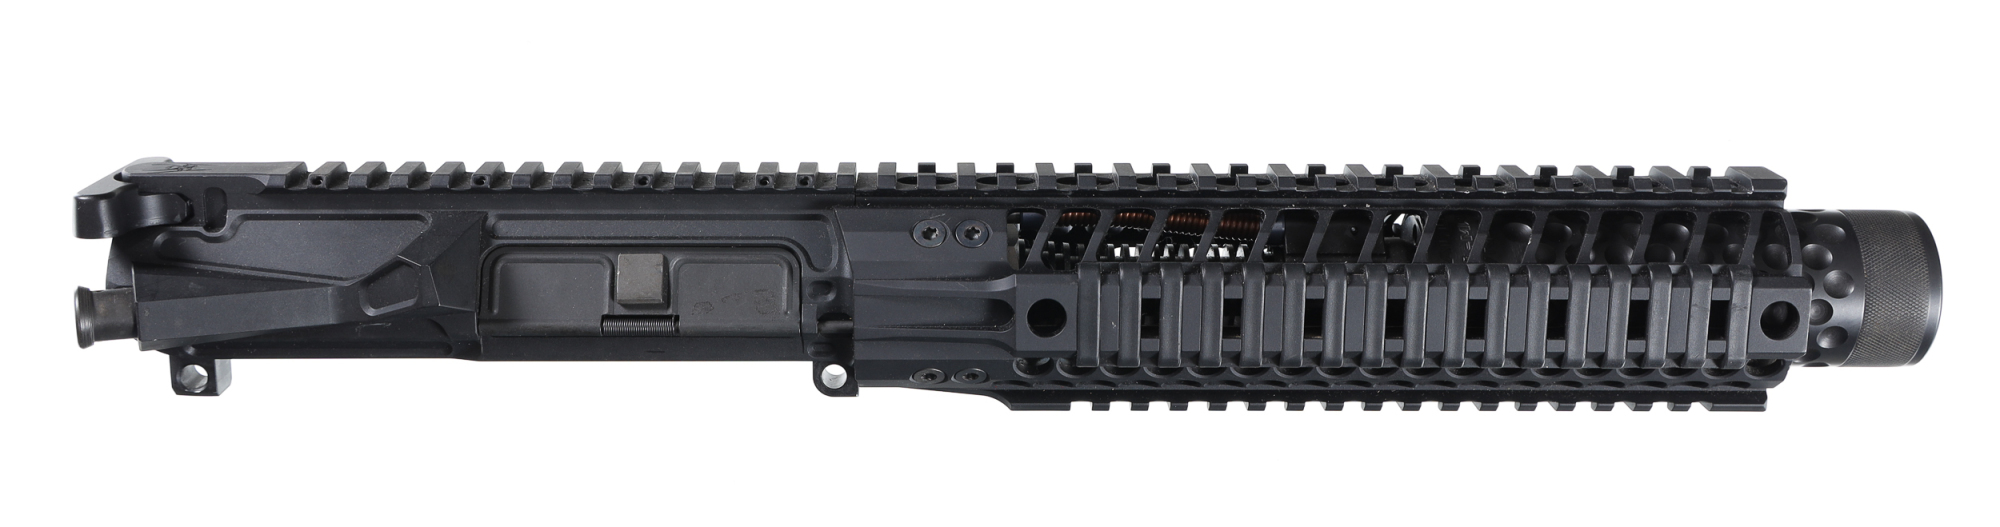 NFA-SOT 49 Suppressed Spikes Tactical MRS2 Suppres